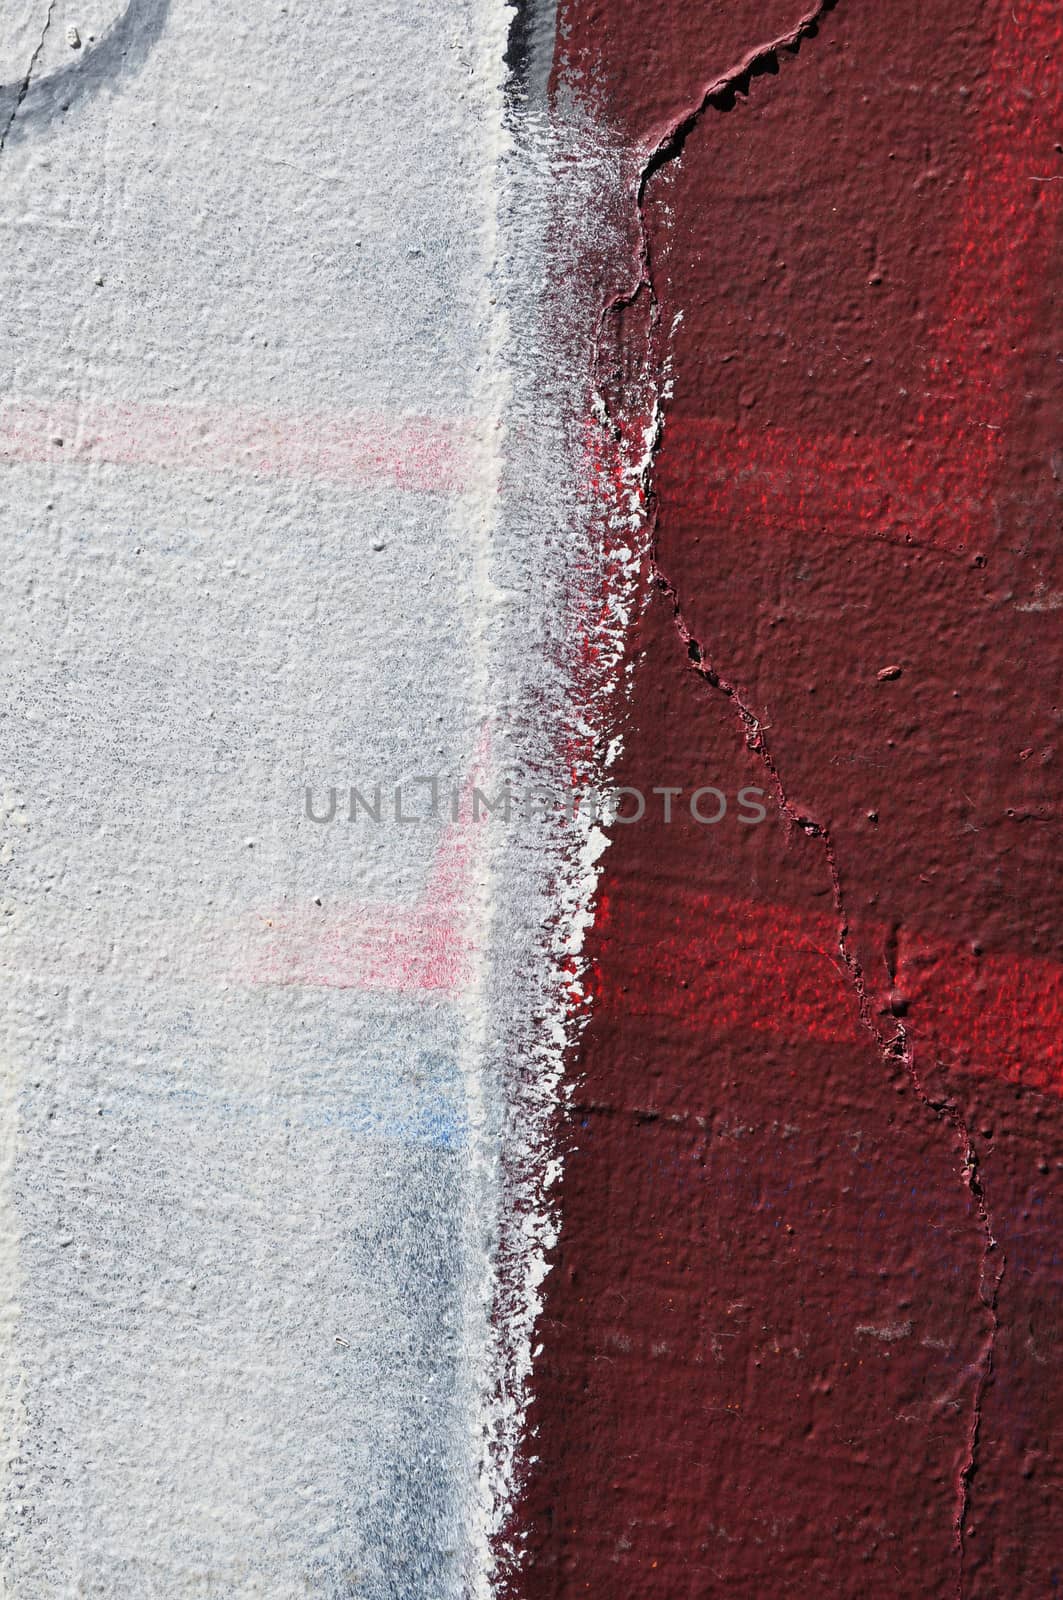 White paint smudged over textured wall. Abstract background.